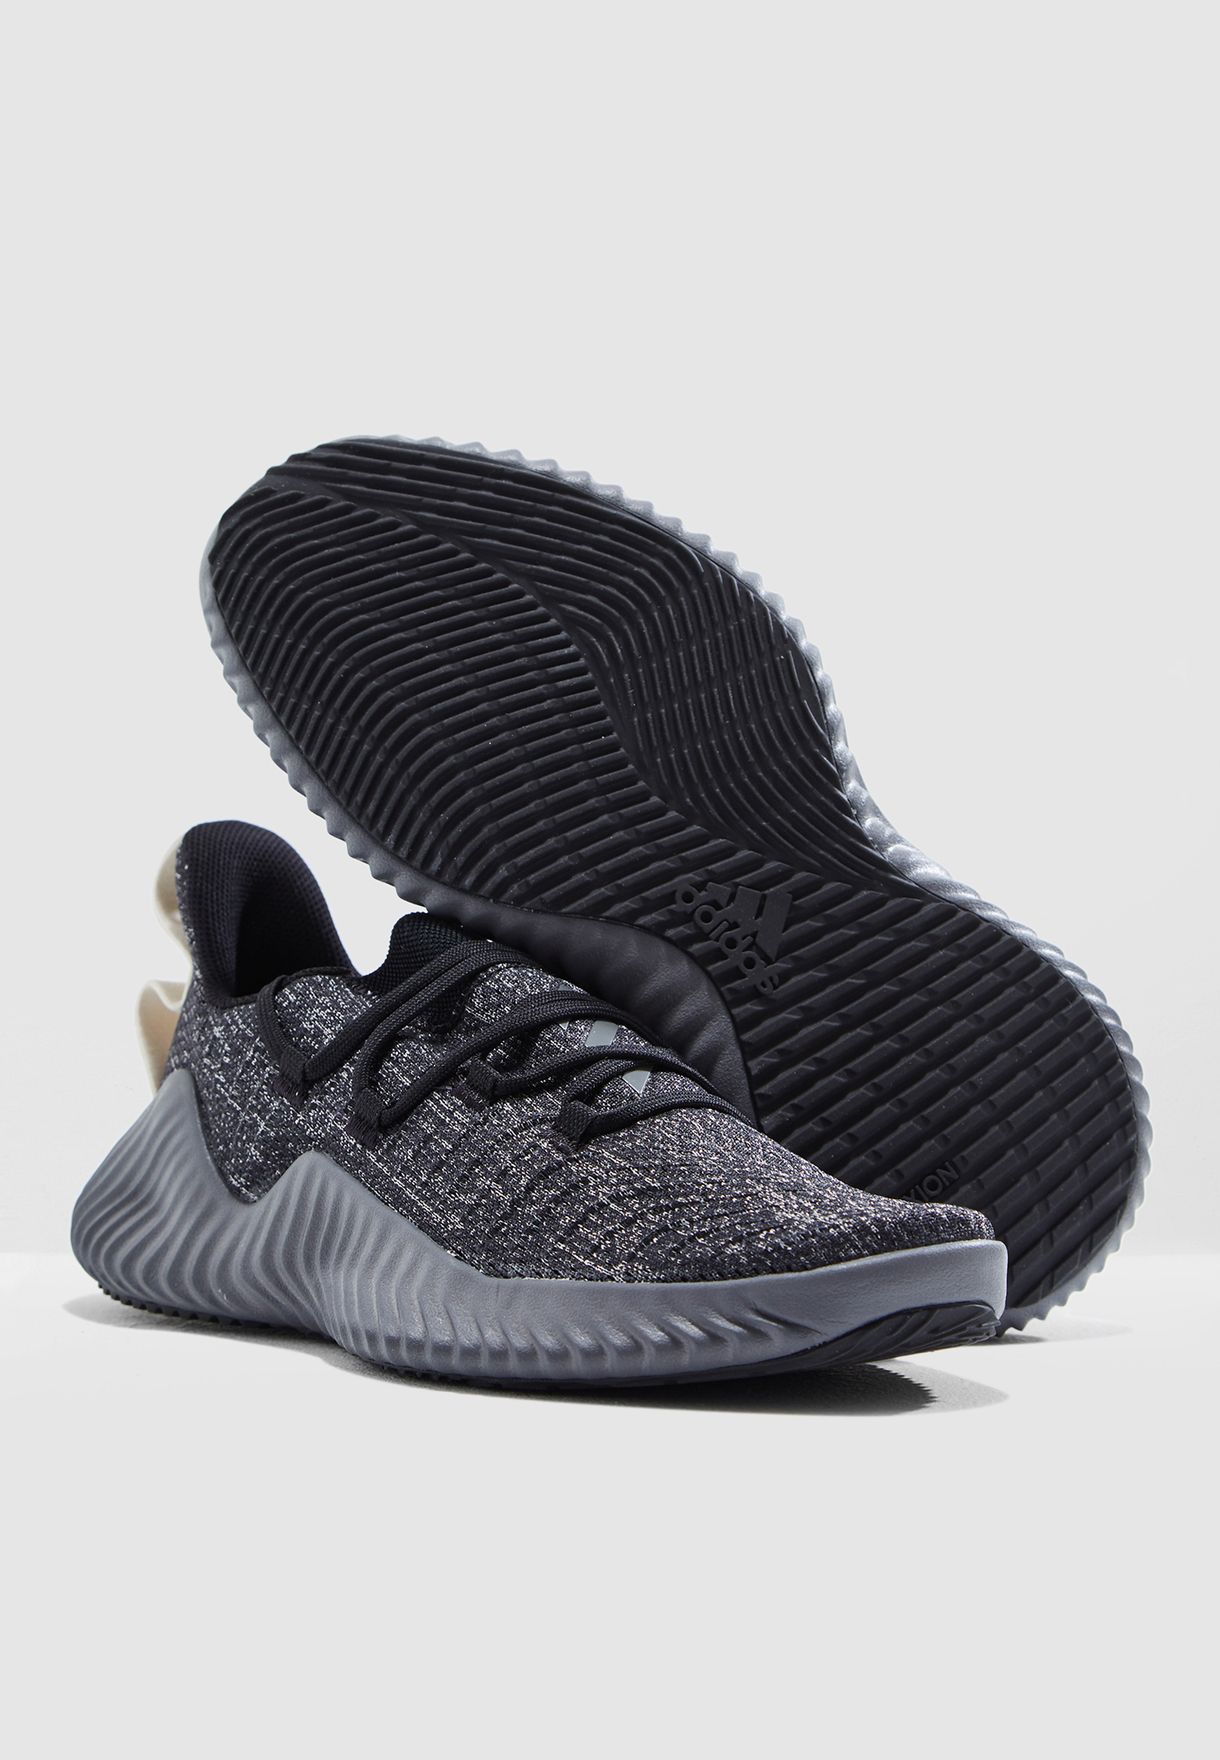 Buy Adidas Black Alphabounce Trainer for Men in Mena, Worldwide 